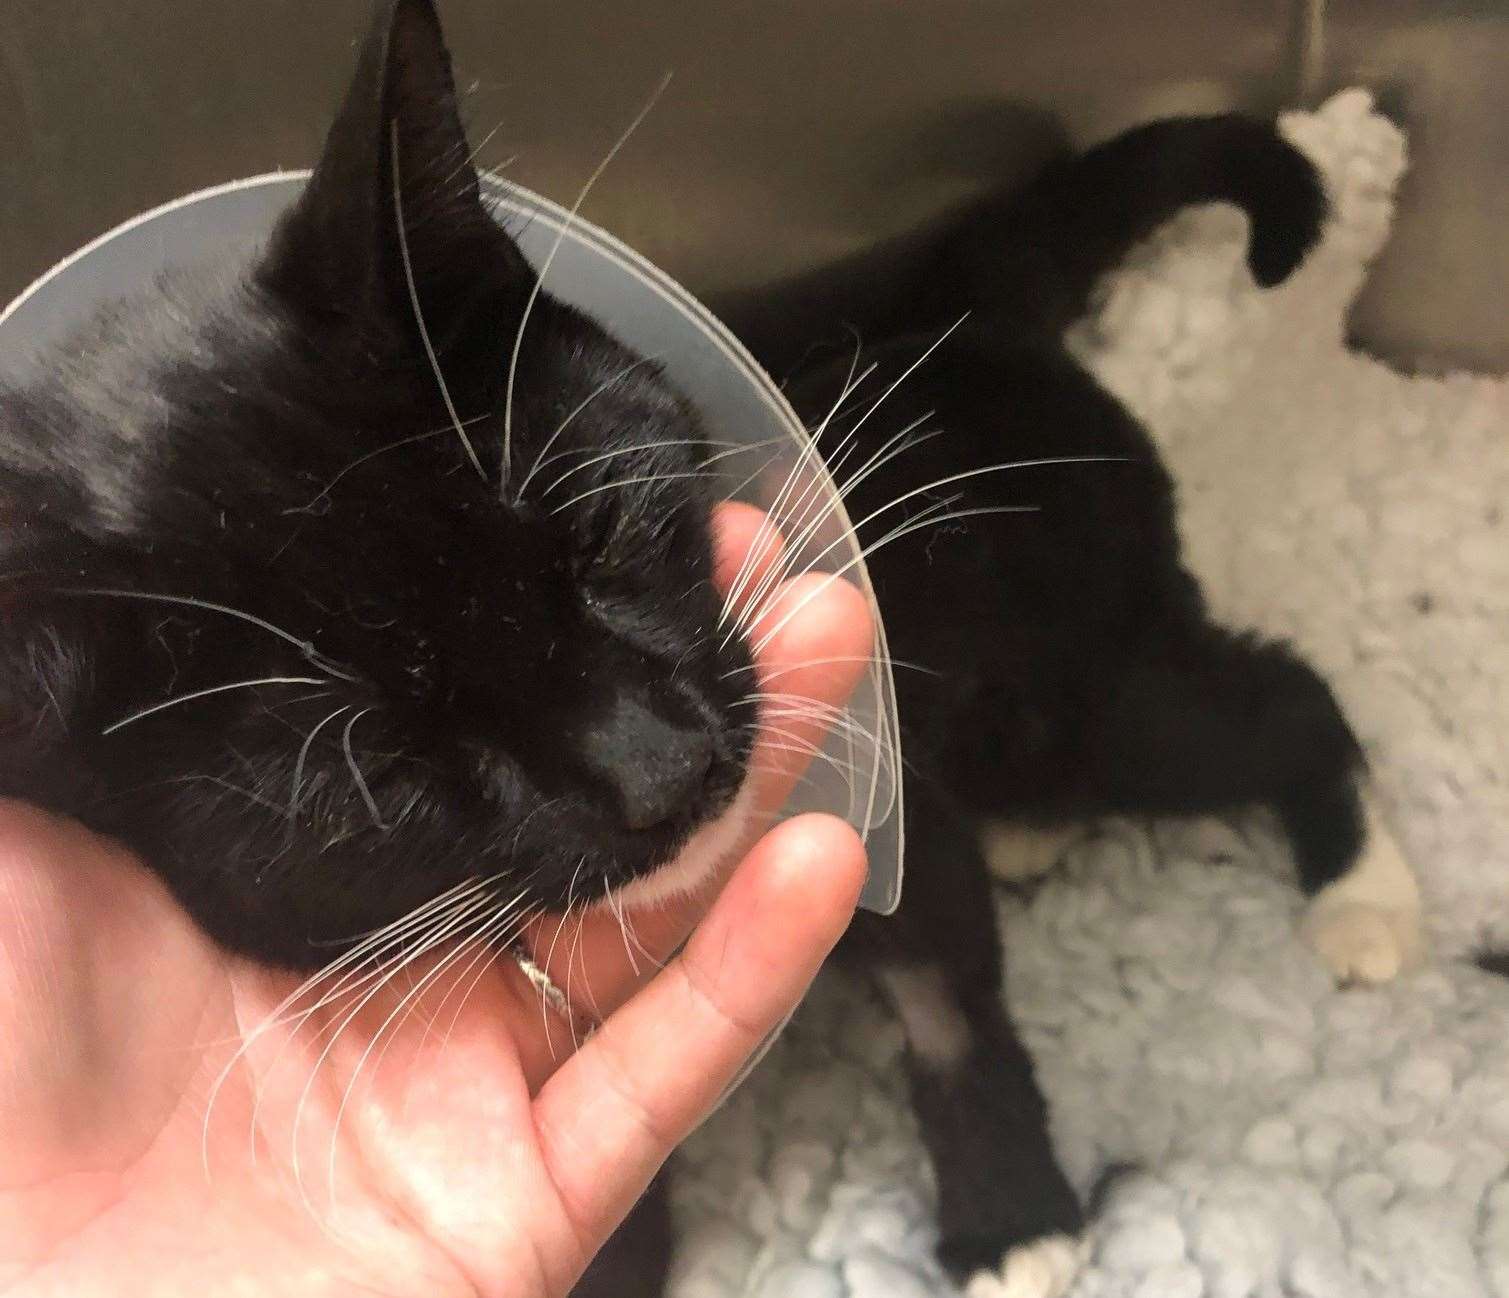 Comet the Kitten, from Gillingham recovering in the vets after being spun in a washing machine. Pic: Vets Now (15280966)